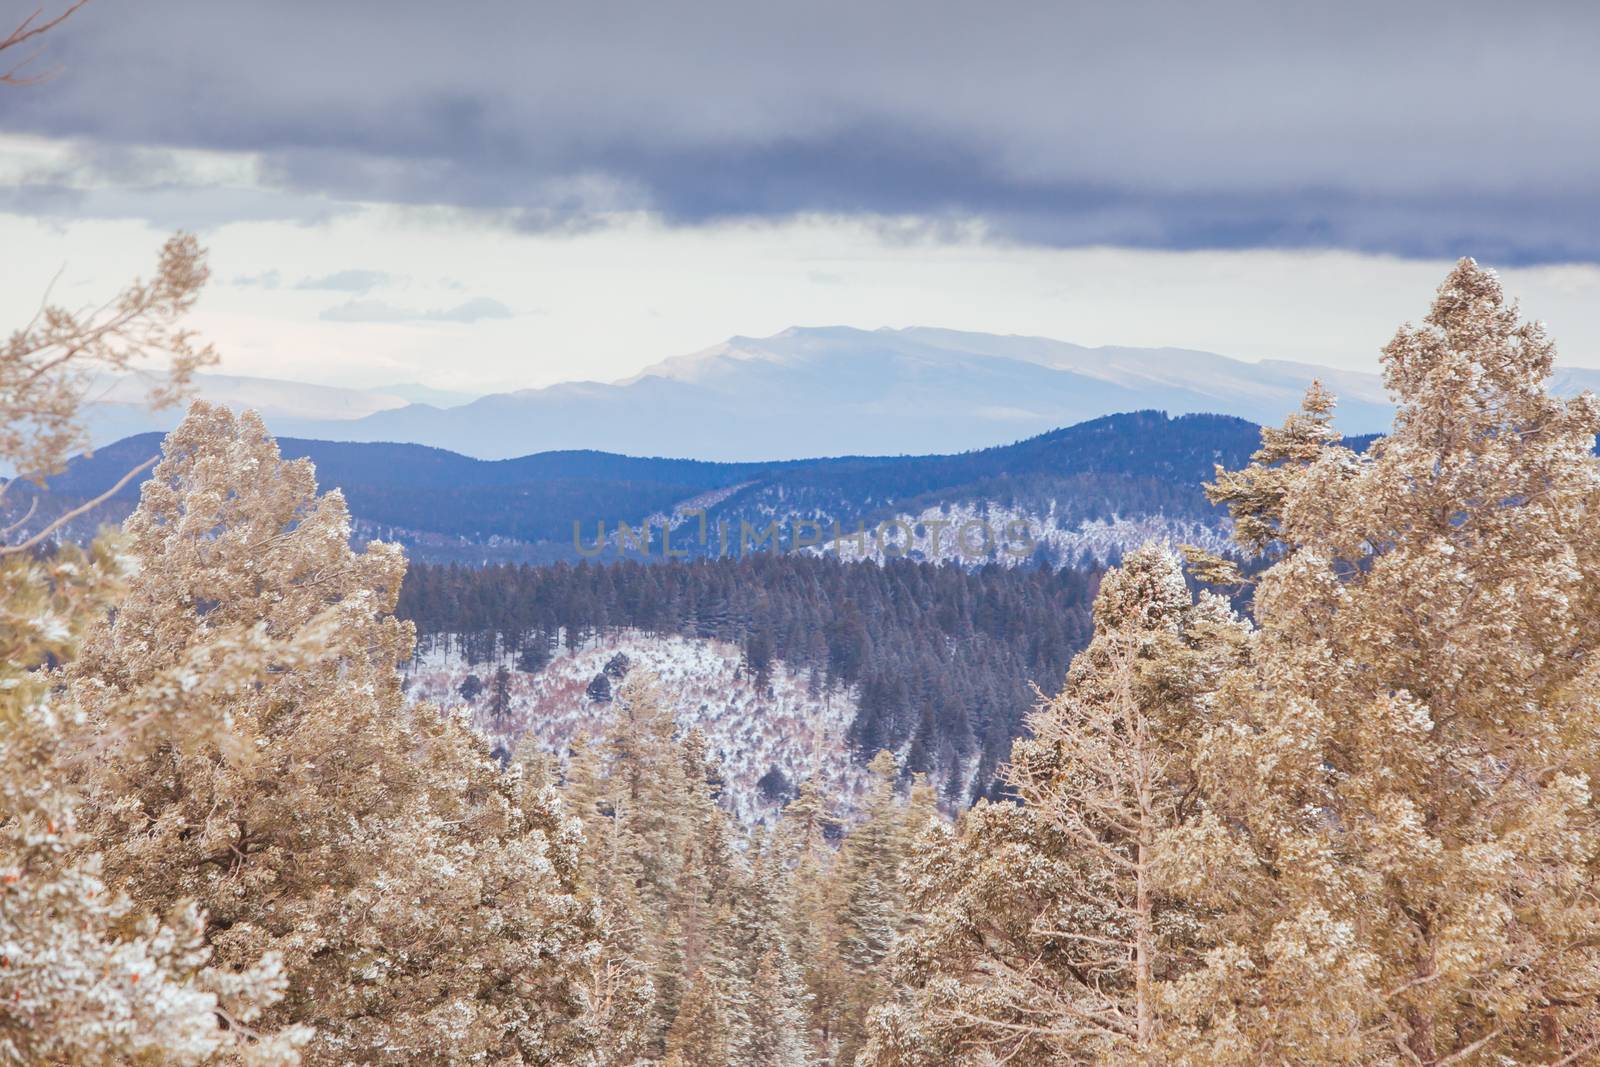 View towards Alamogordo and White Sands National Park from Cloudcroft on a cold winter's day in New Mexico, USA